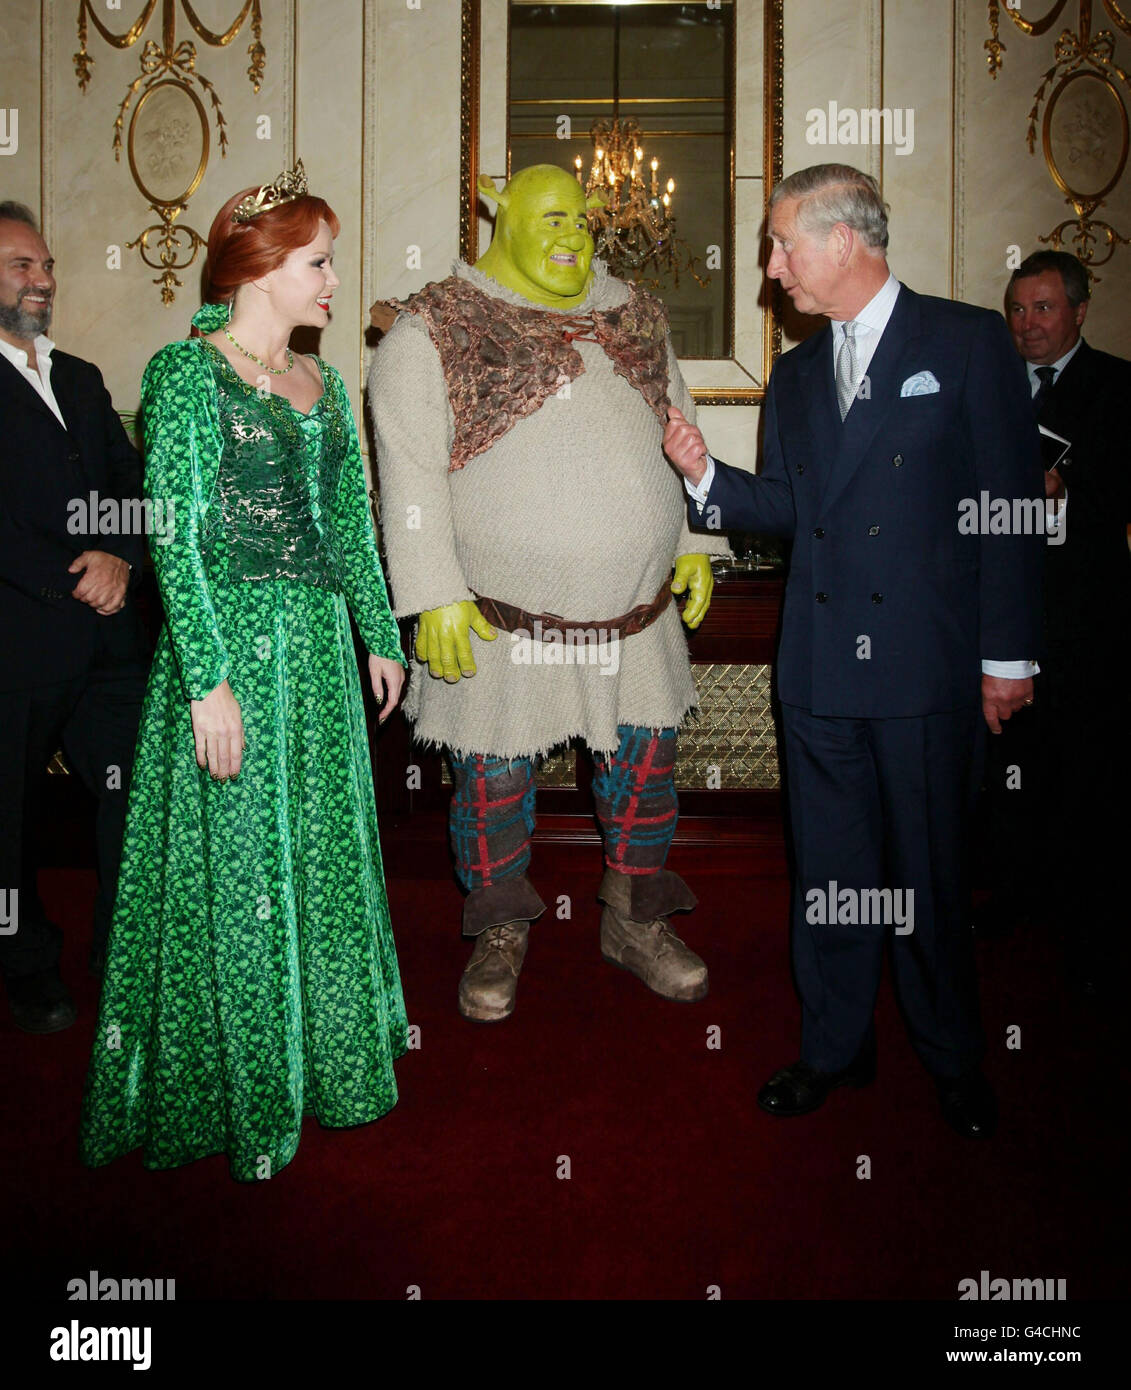 The Prince of Wales meets Nigel Lindsay as Shrek and Amanda Holden as Princess Fiona, as Sam Mendes (left) looks on before a special performance of Shrek The Musical at the Theatre Royal in Drury Lane, London. Stock Photo